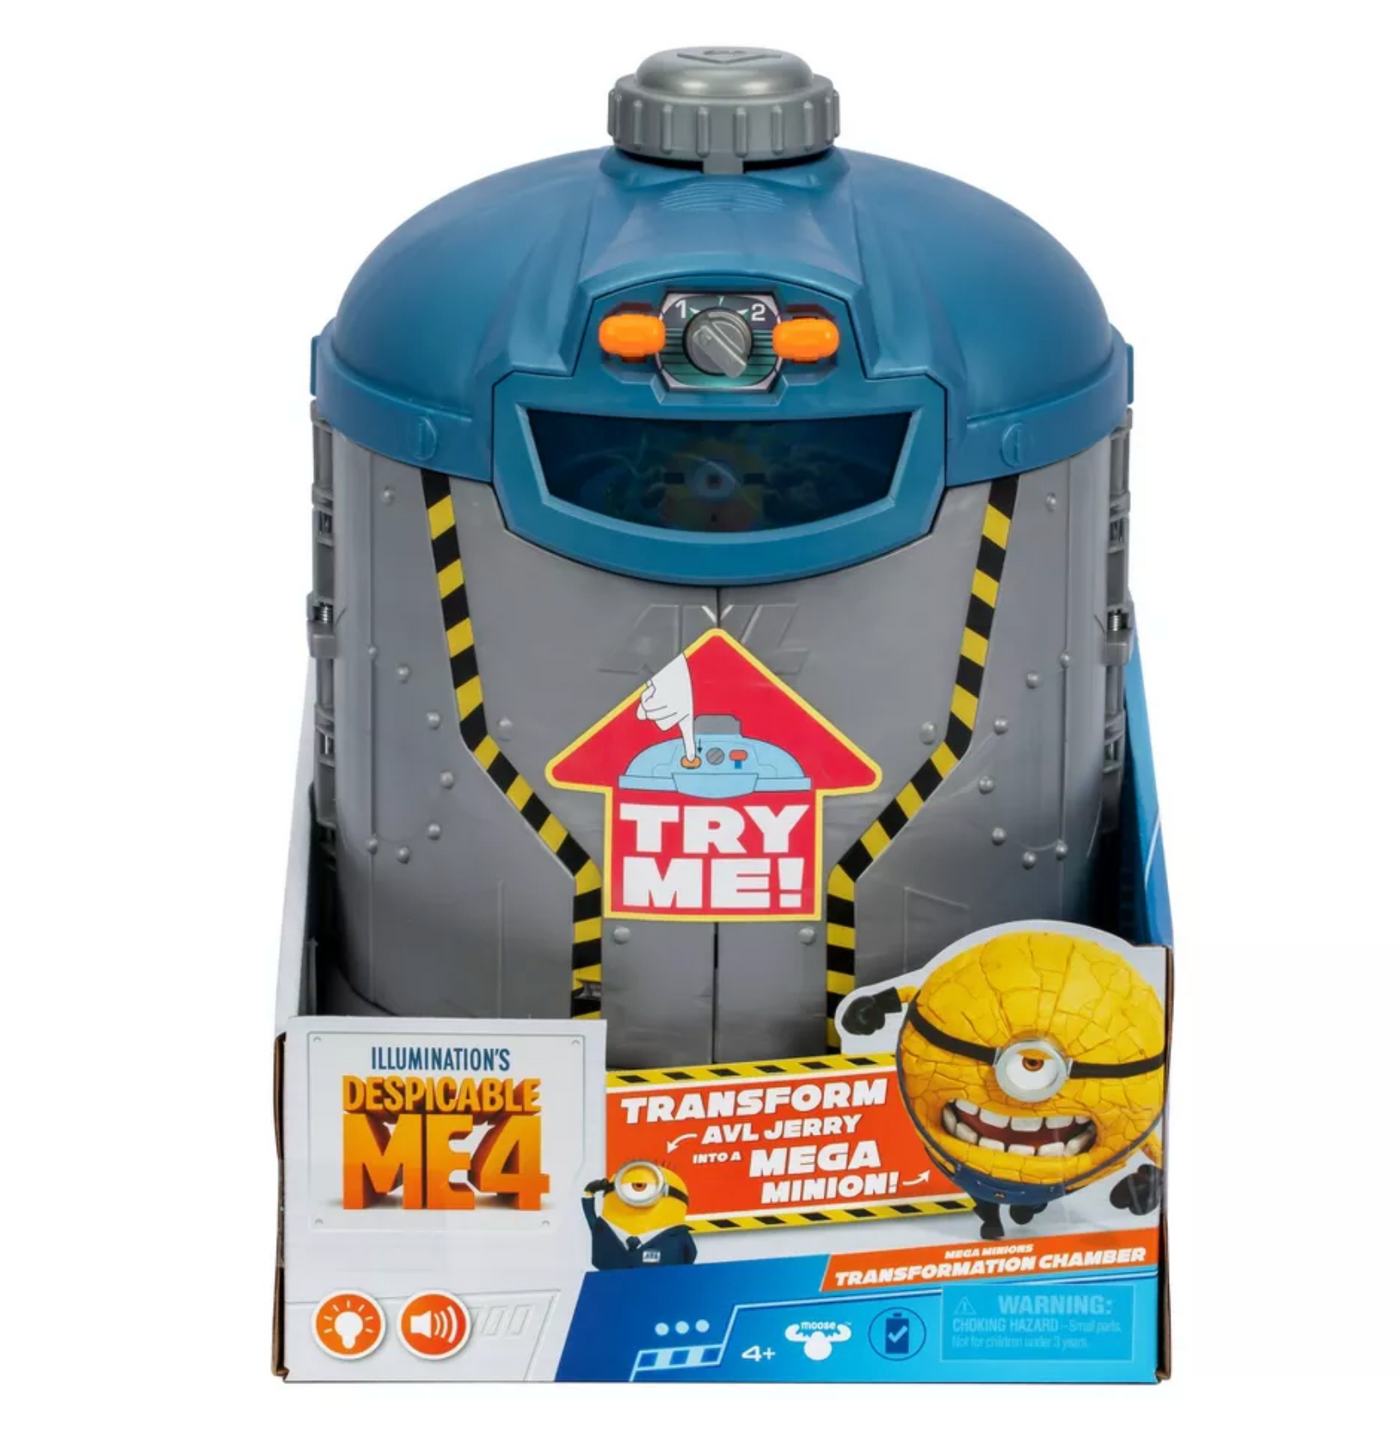 Despicable Me 4 Mega Minions Transformation Chamber Playset New with Box